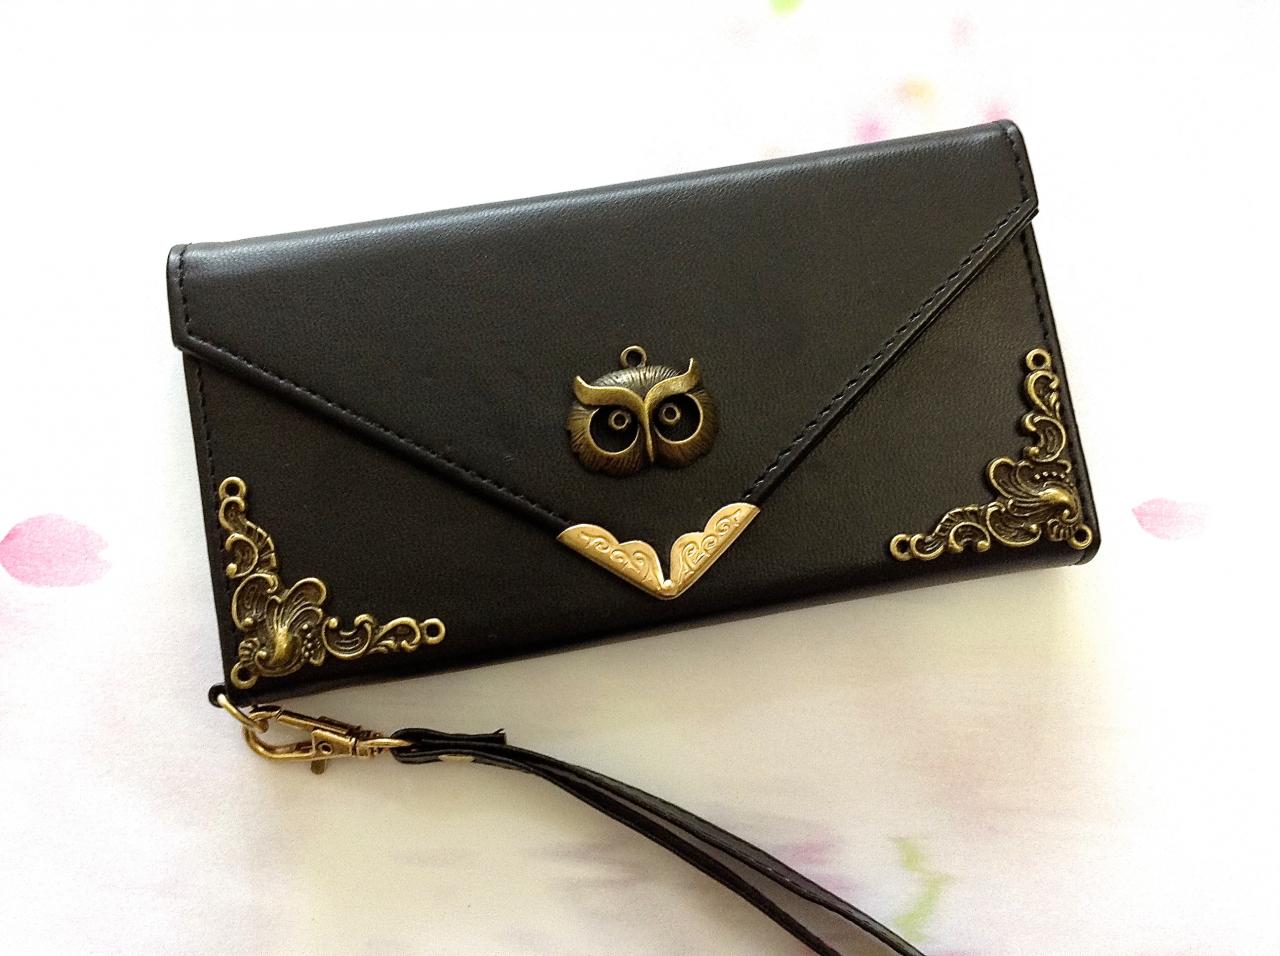 Owl Iphone 6 6s 4.7 Leather Wallet Case, Vintage Iphone 6 6s Plus Leather Wallet Case, Item No.280